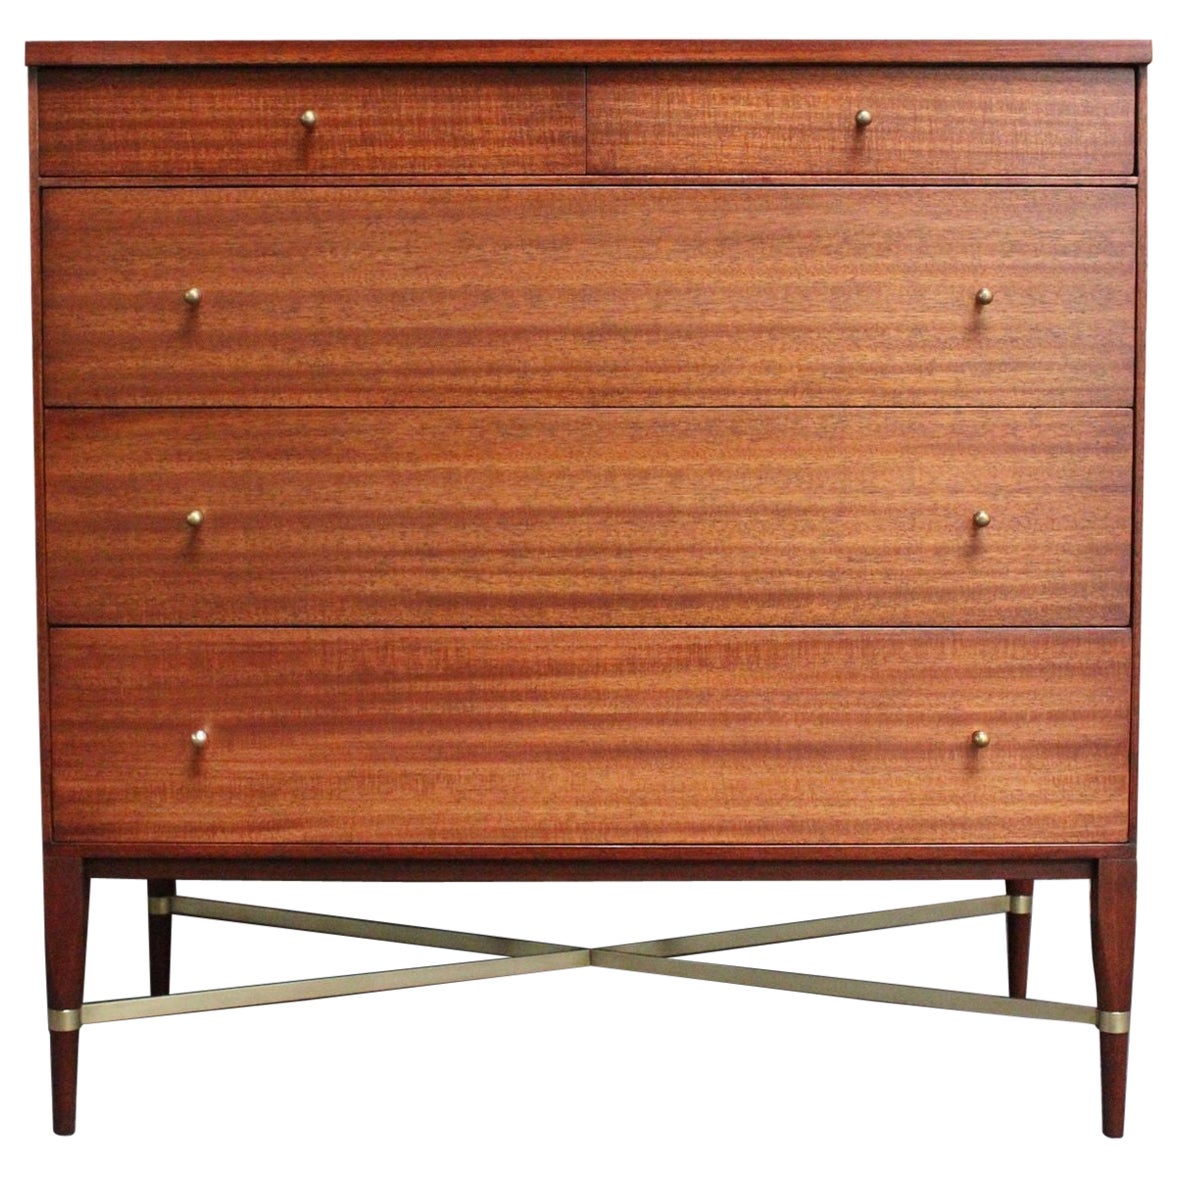 Paul Mccobb Calvin Group Mahogany and Brass Five-Drawer Chest / Dresser For Sale